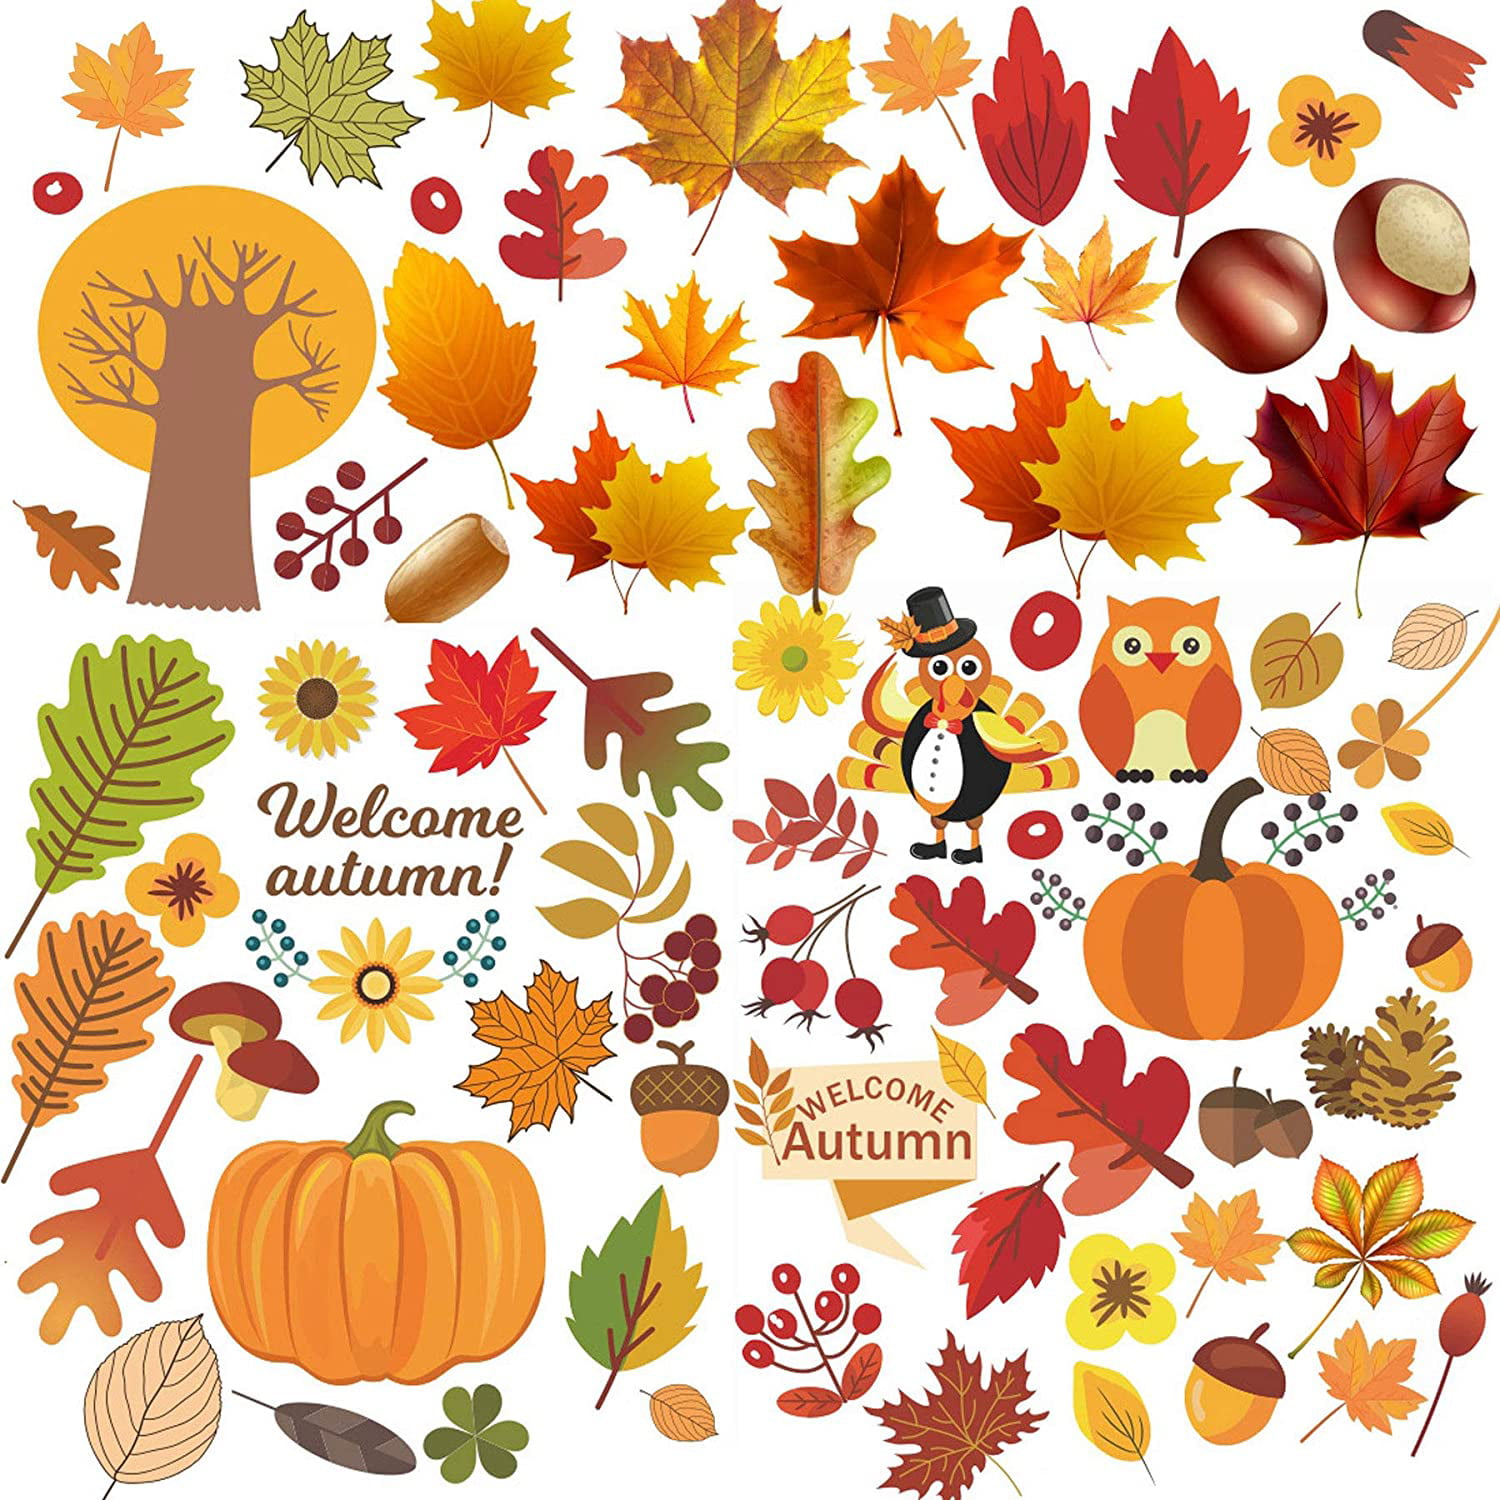 Style Set 2 3 Sheets 400 Pieces Fall Leaves Window Clings Stickers Thanksgiving Pumpkin Turkey Straw Hat Maple Leaves Acorns Window Stickers for Autumn Party Decorations 